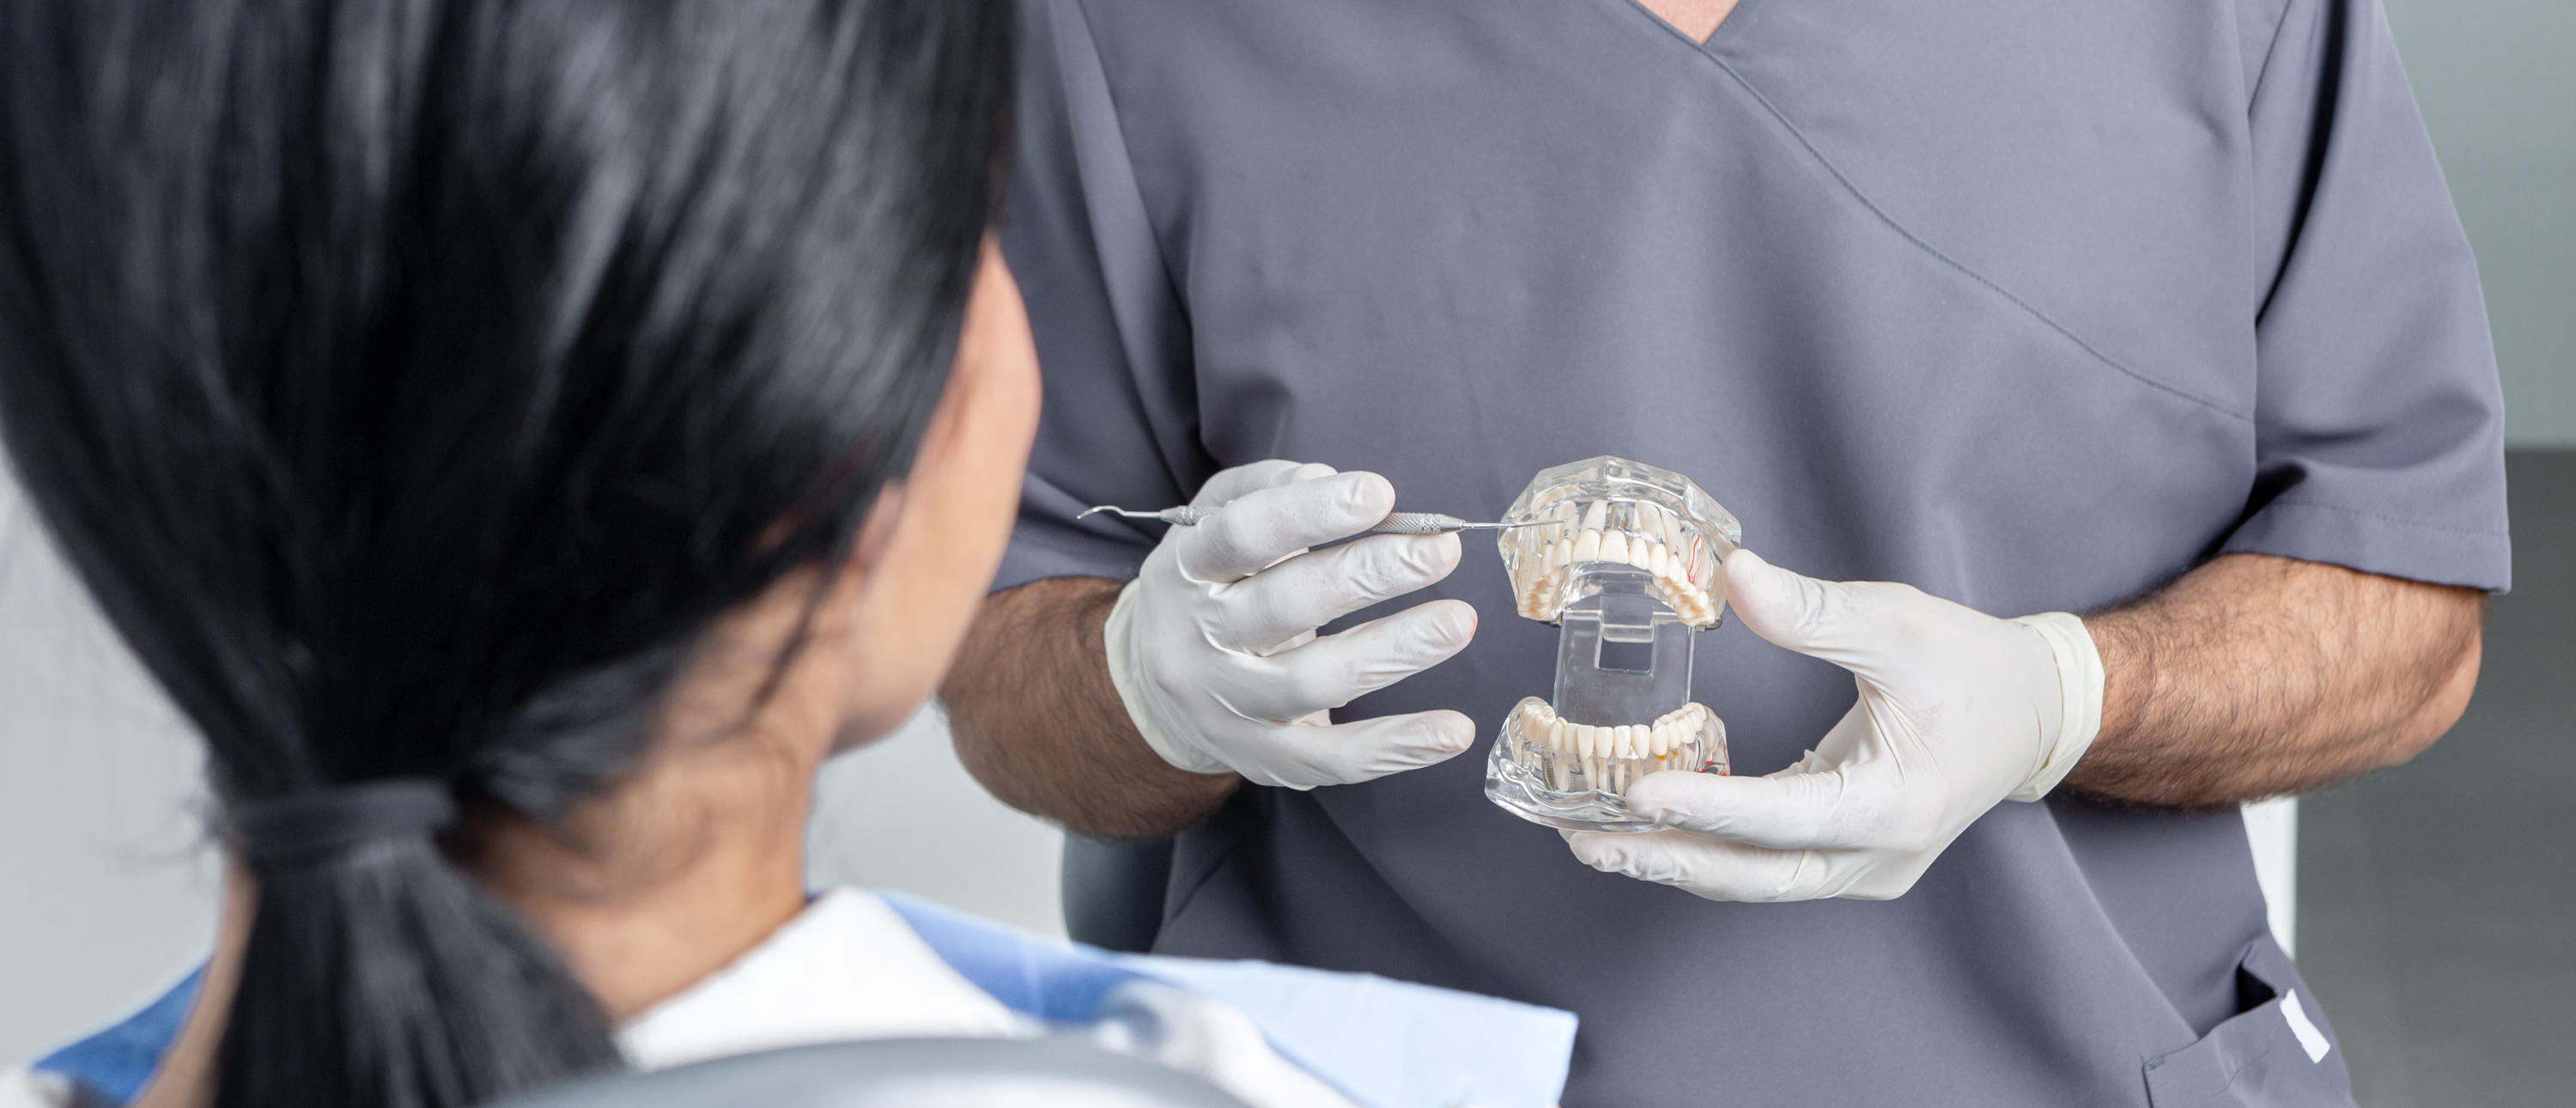 Dentist showing an opened dental mould to a patient in a dental clinic